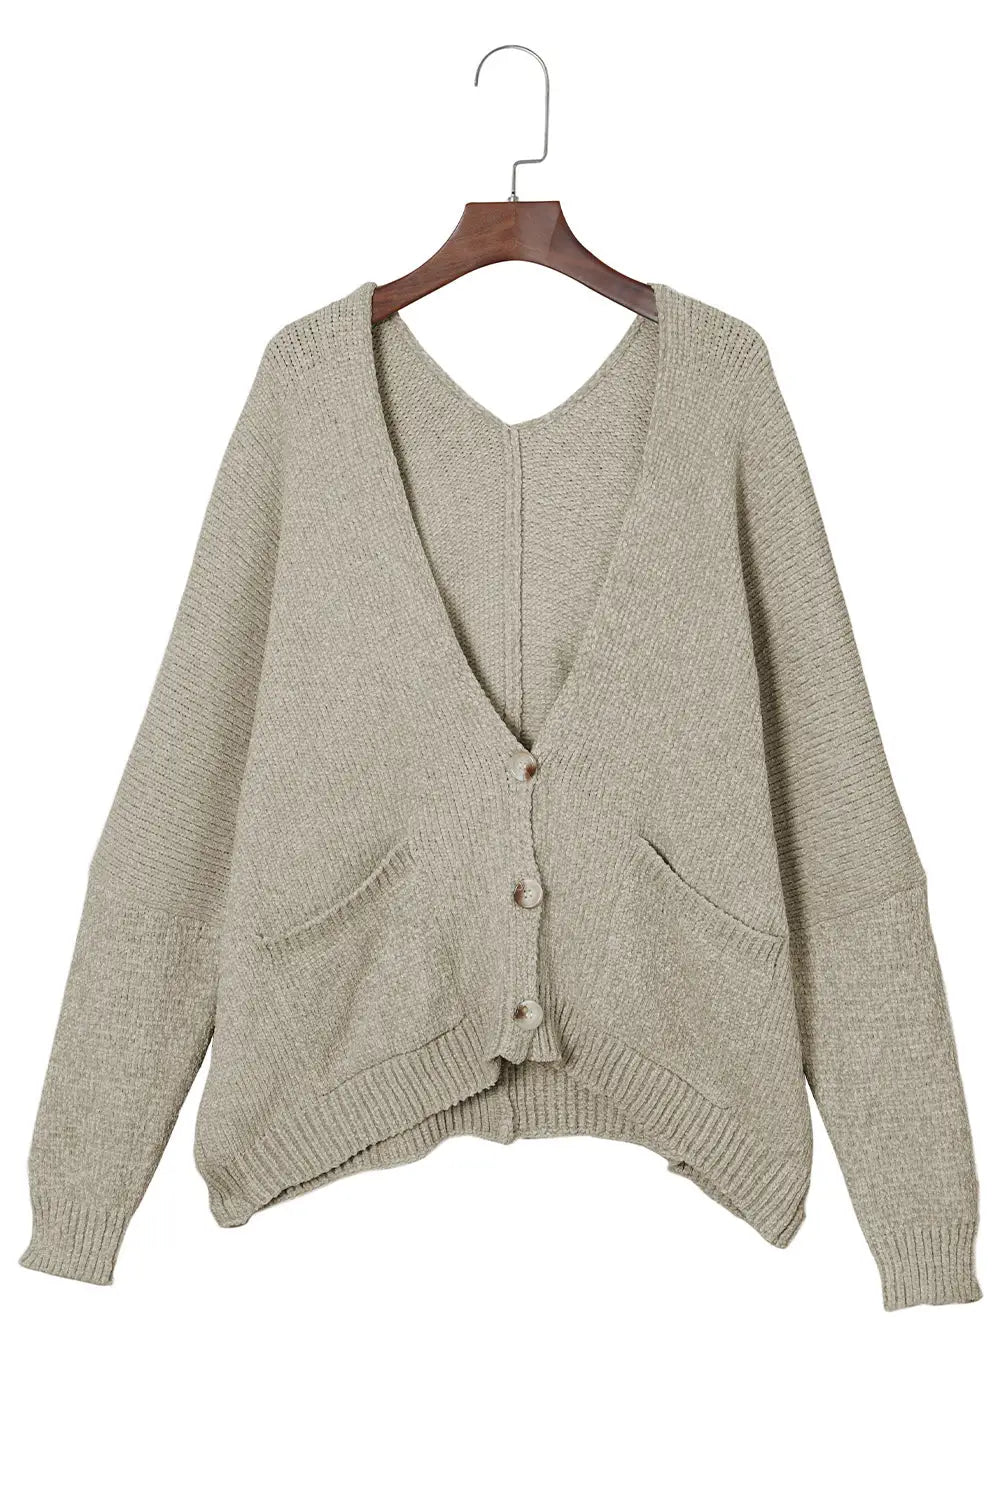 Gray buttons front pocketed sweater cardigan - & cardigans